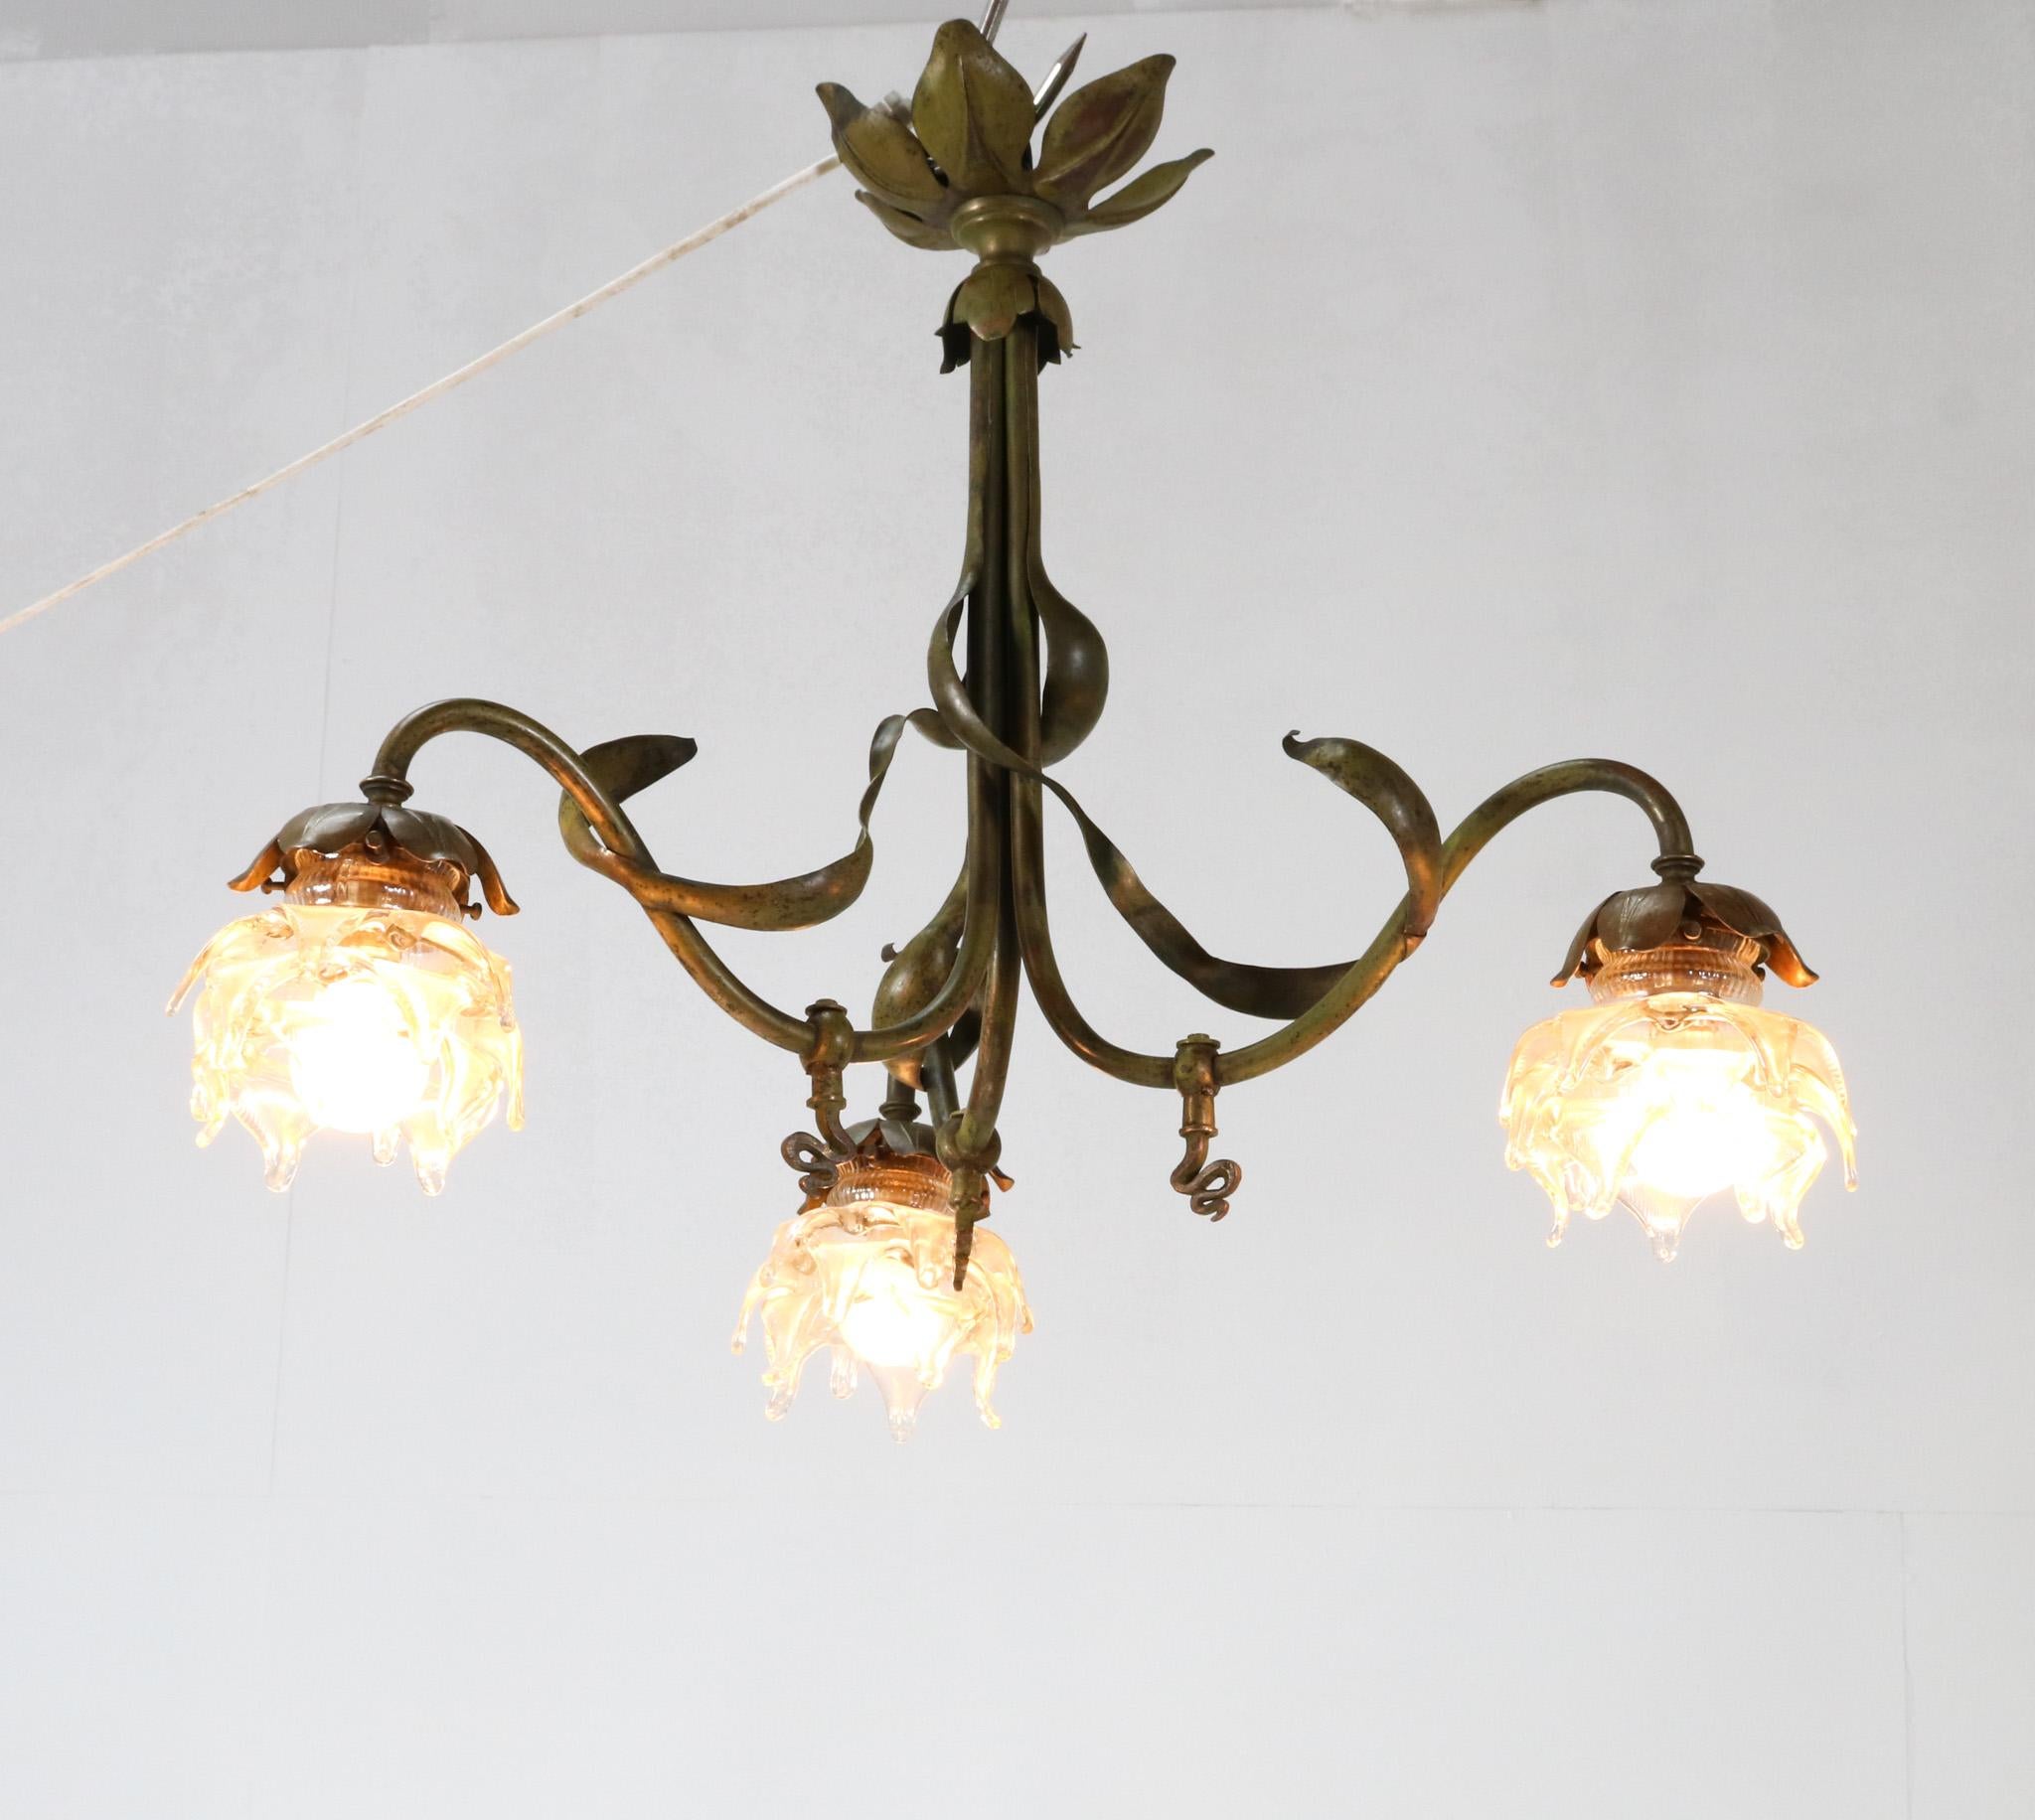 Stunning and rare Art Nouveau three-light chandelier.
Striking French design from the 1900s.
Original patinated brass frame with three original blown glass shades.
This wonderful Art Nouveau three-light chandelier used to be a gas light